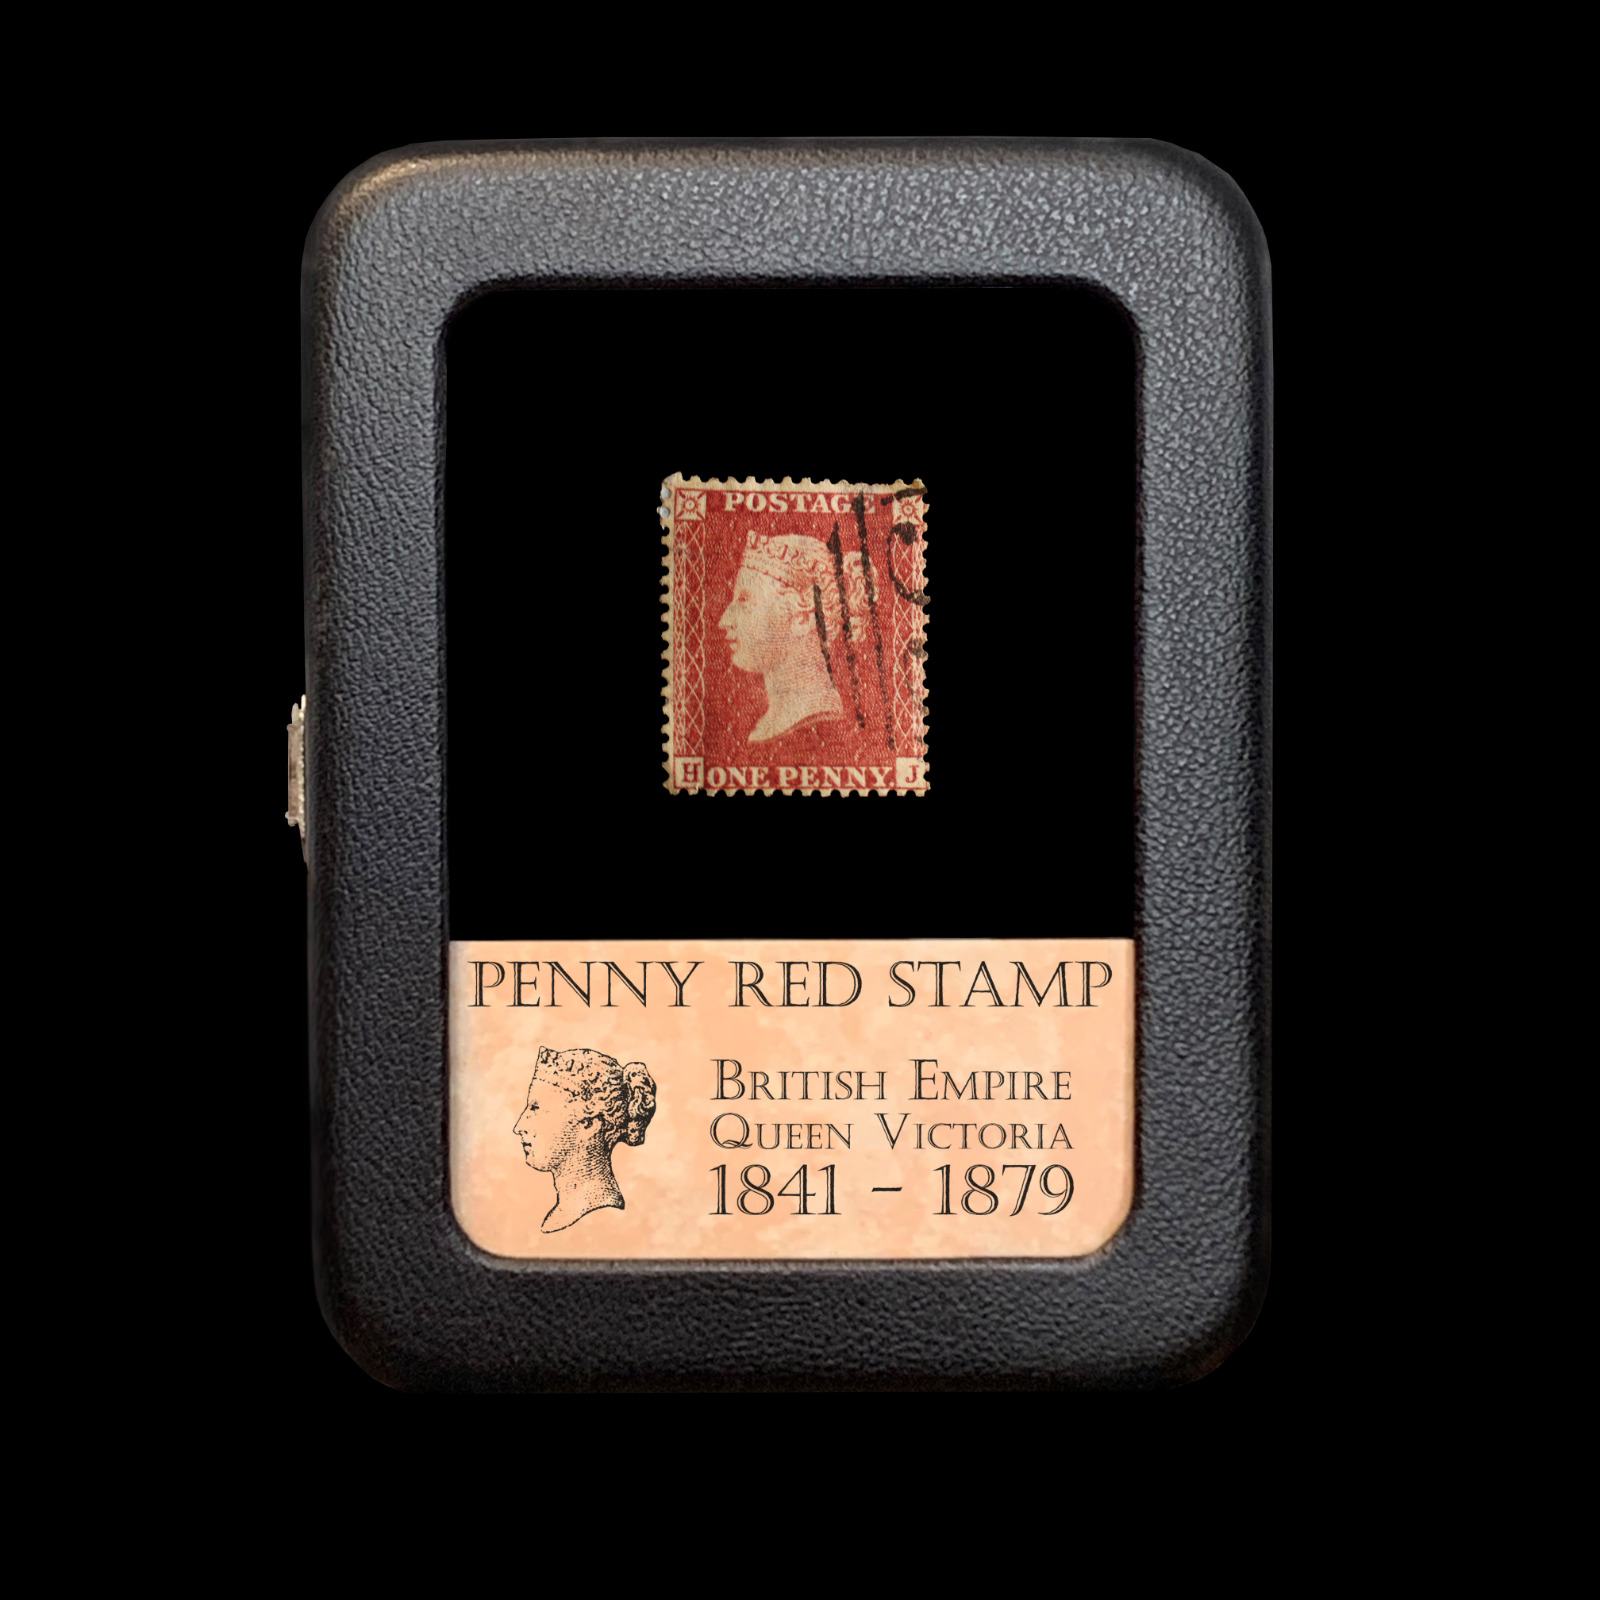 British Empire Penny Red Stamp